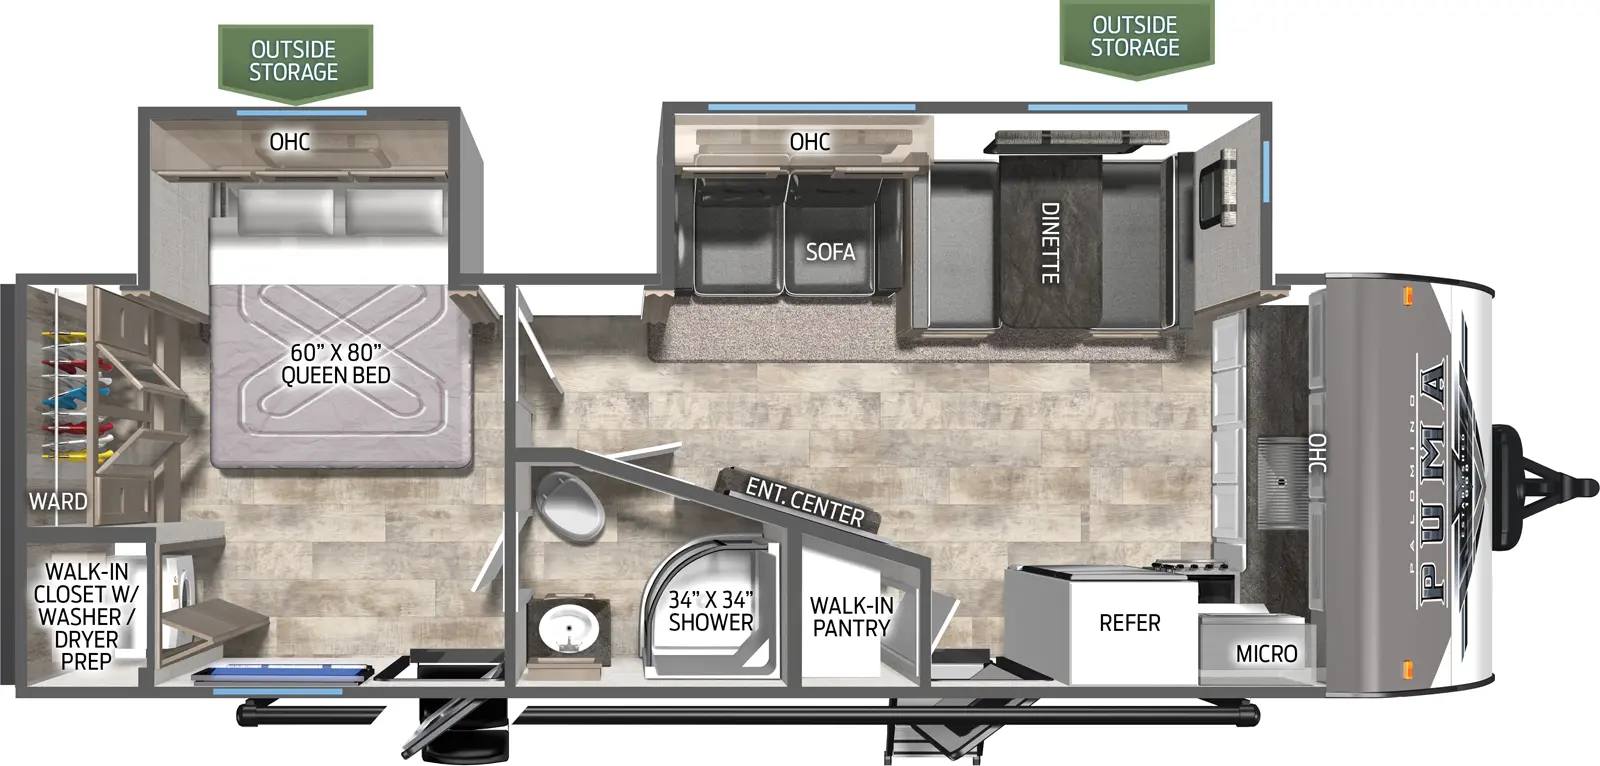 The 26FKDS has two slide outs and two entries. Exterior features outside storage. Interior layout front to back: front kitchen counter with sink and overhead cabinets wrap to door side with microwave, cooktop, refrigerator, entry door, and walk-in pantry; off-door side slideout with dinette, sofa and overhead cabinet; entertainment center along angled inner wall; door side full passthrough bathroom; rear bedroom with off-door side queen bed slideout with overhead cabinets, door side entry, and rear walk-in closet with washer/dryer prep, and wardrobe.